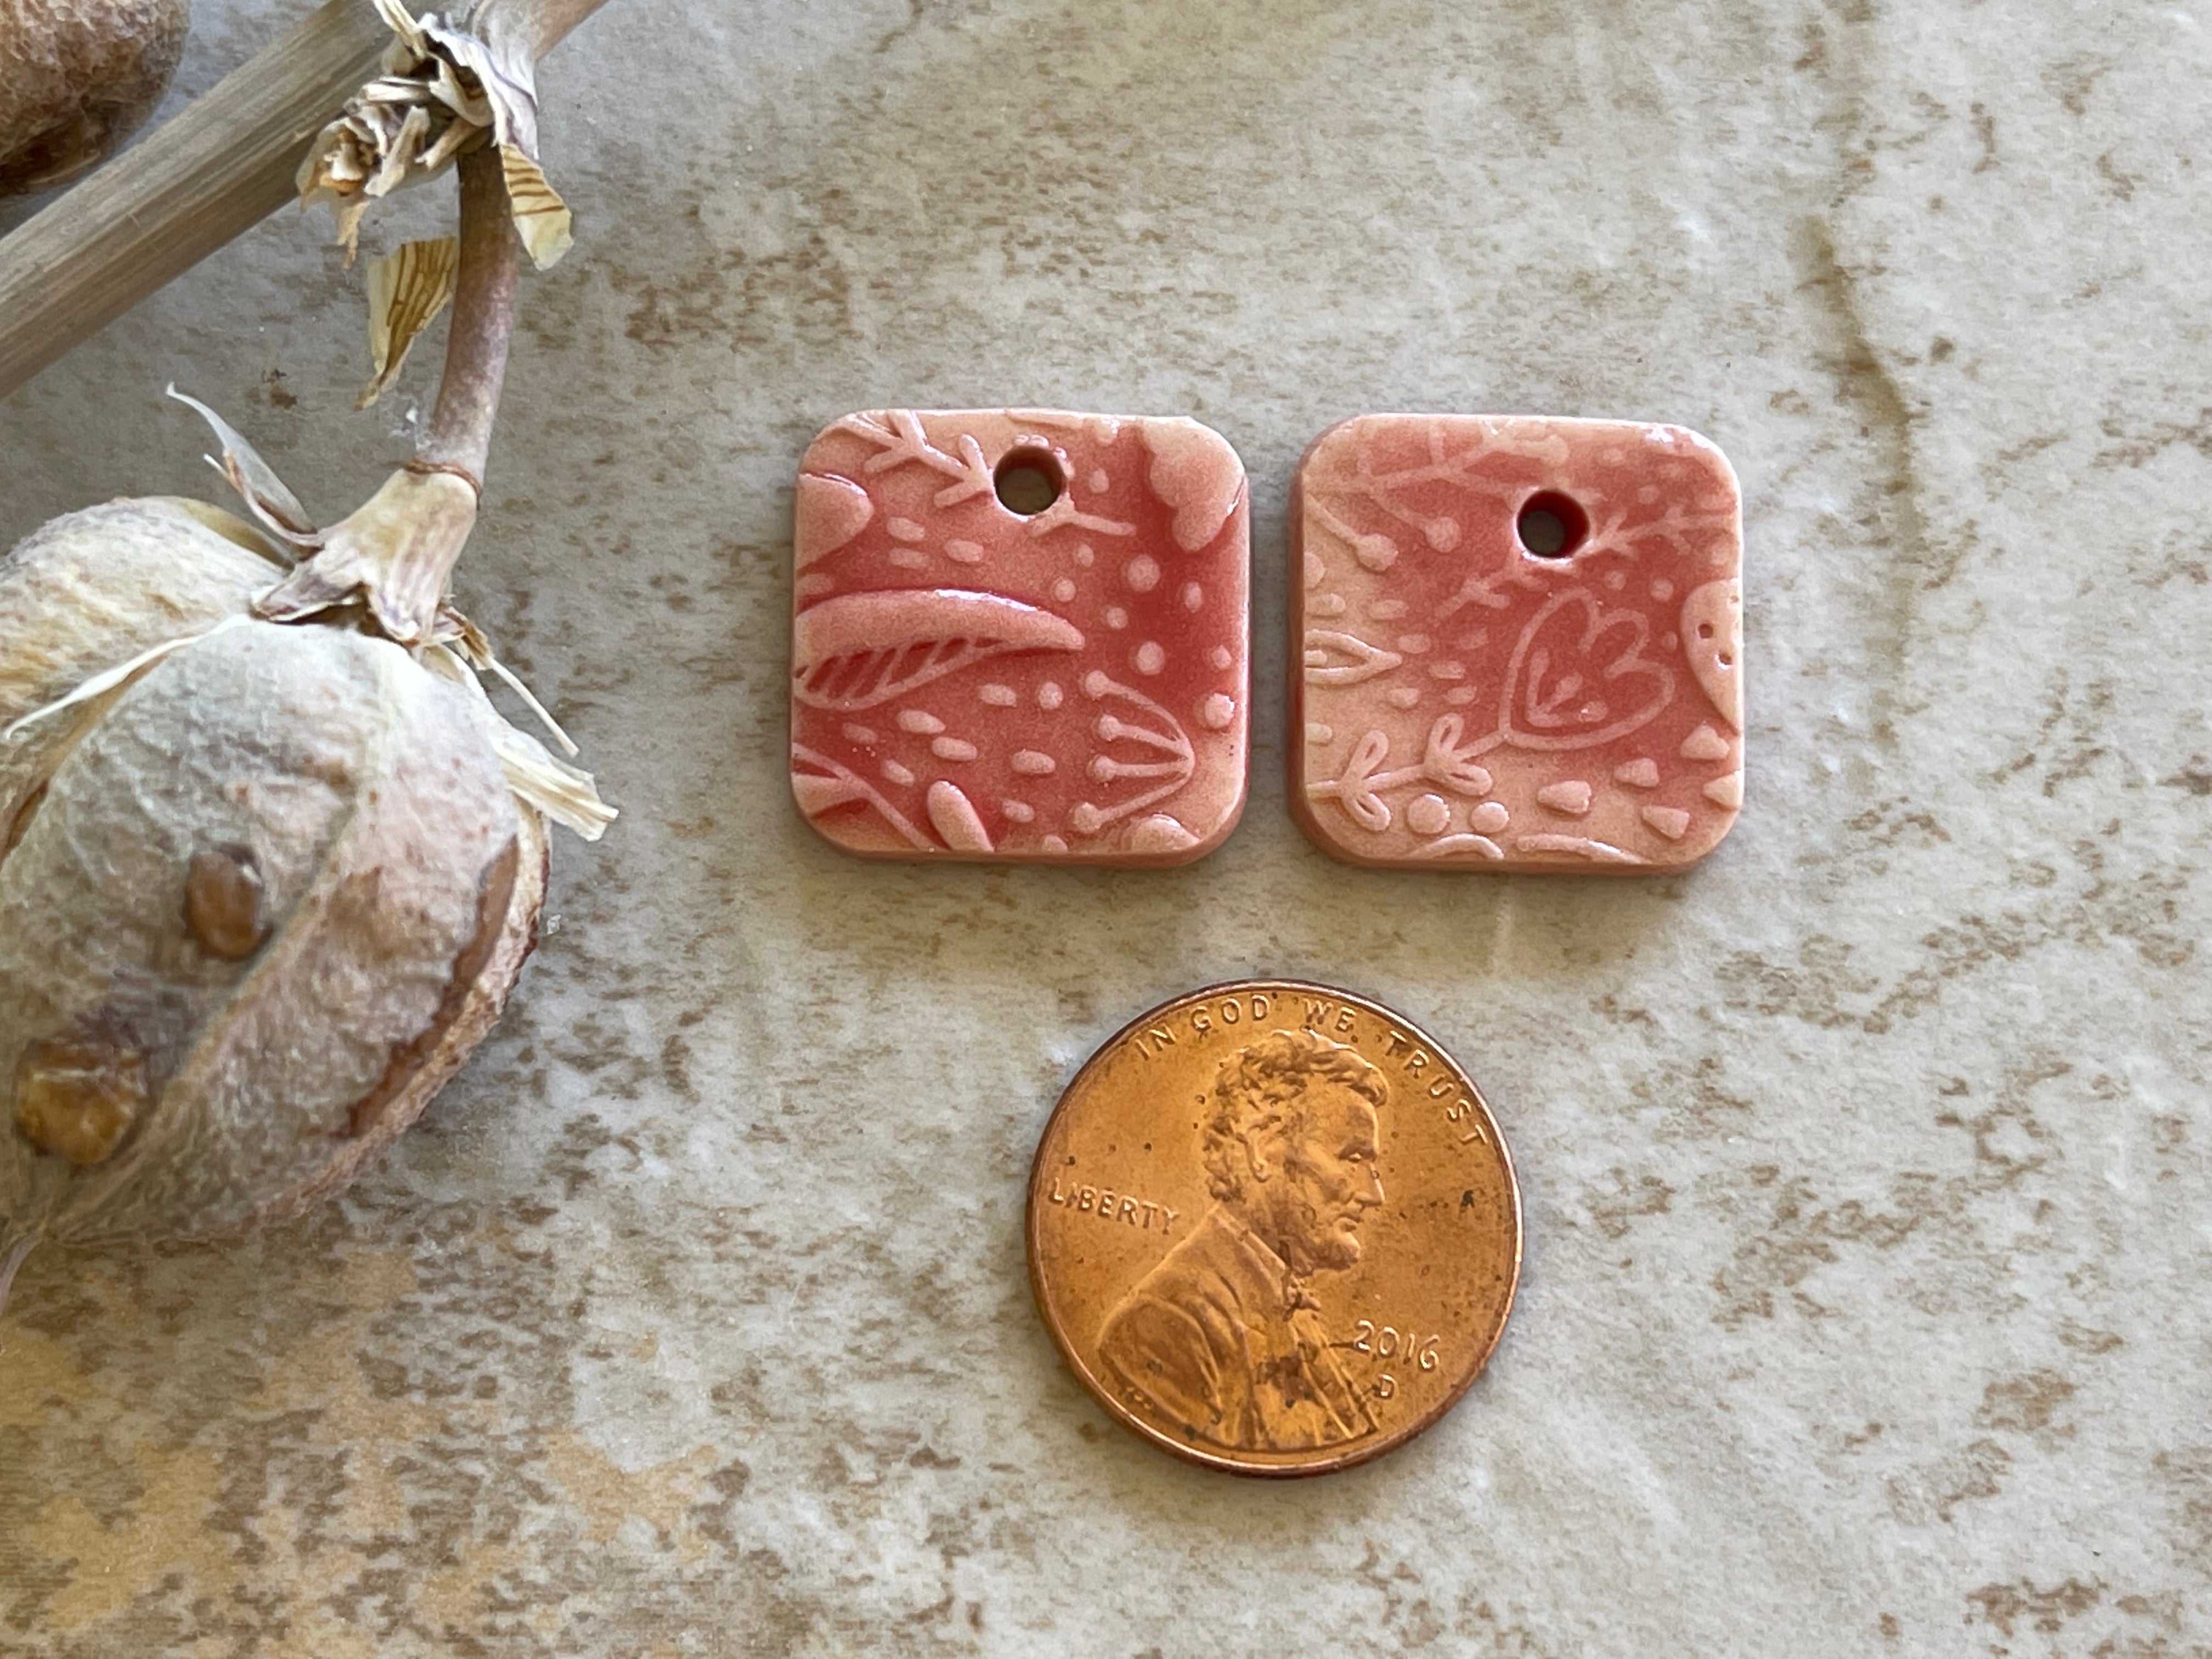 Red Square, Earring Bead Pair, Porcelain Charms, Ceramic Charms, Jewelry Making Components, Beading Handmade, DIY Earrings, DIY Beads